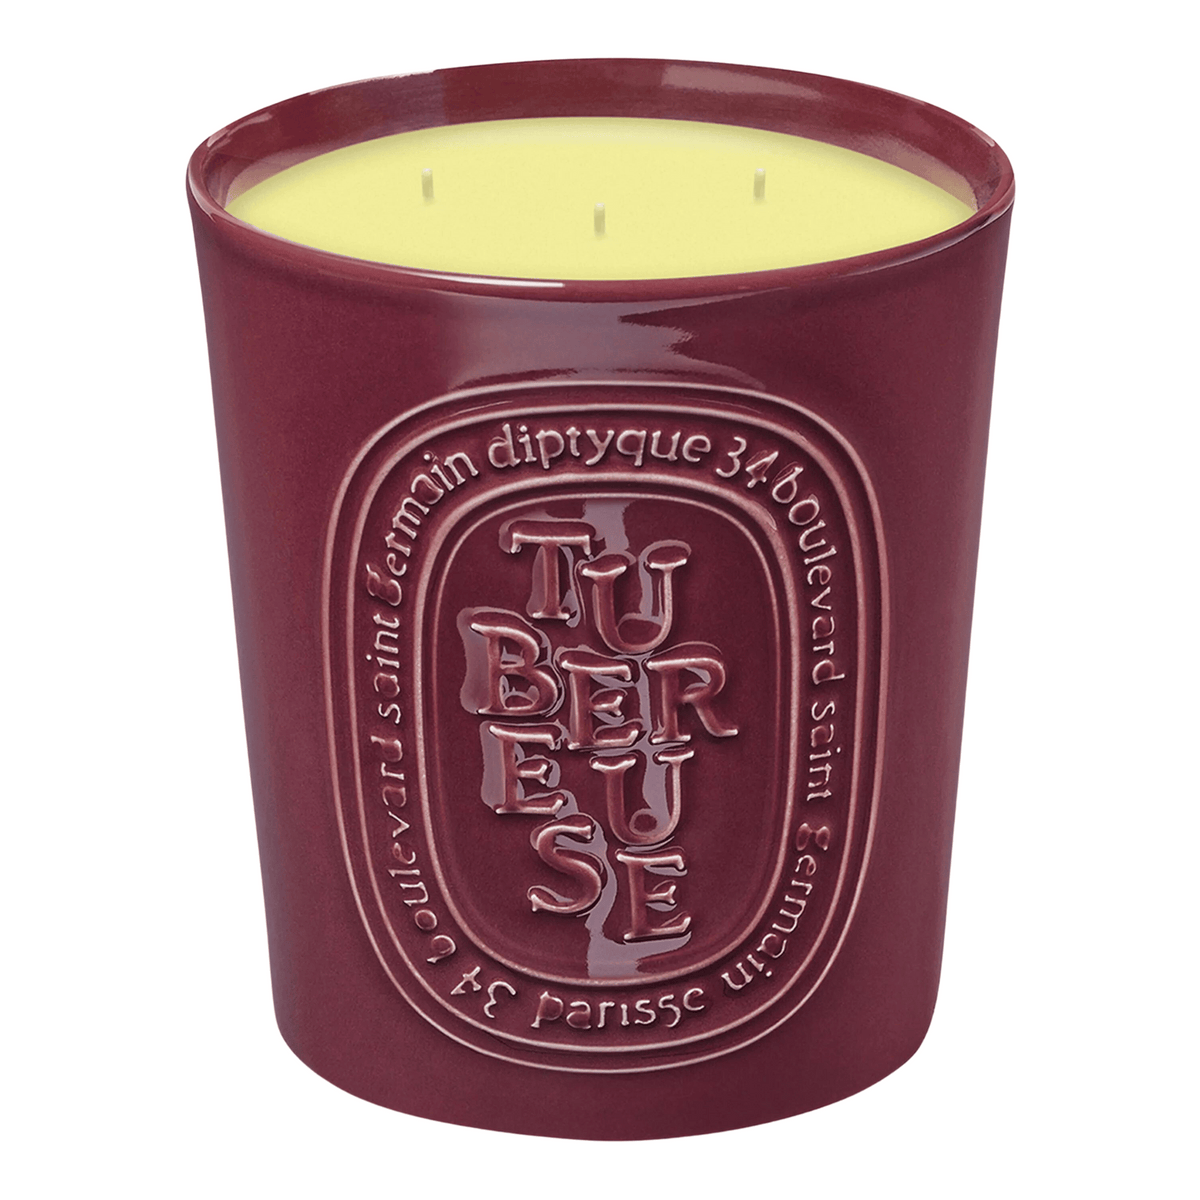 Primary Image of Turberuse Candle